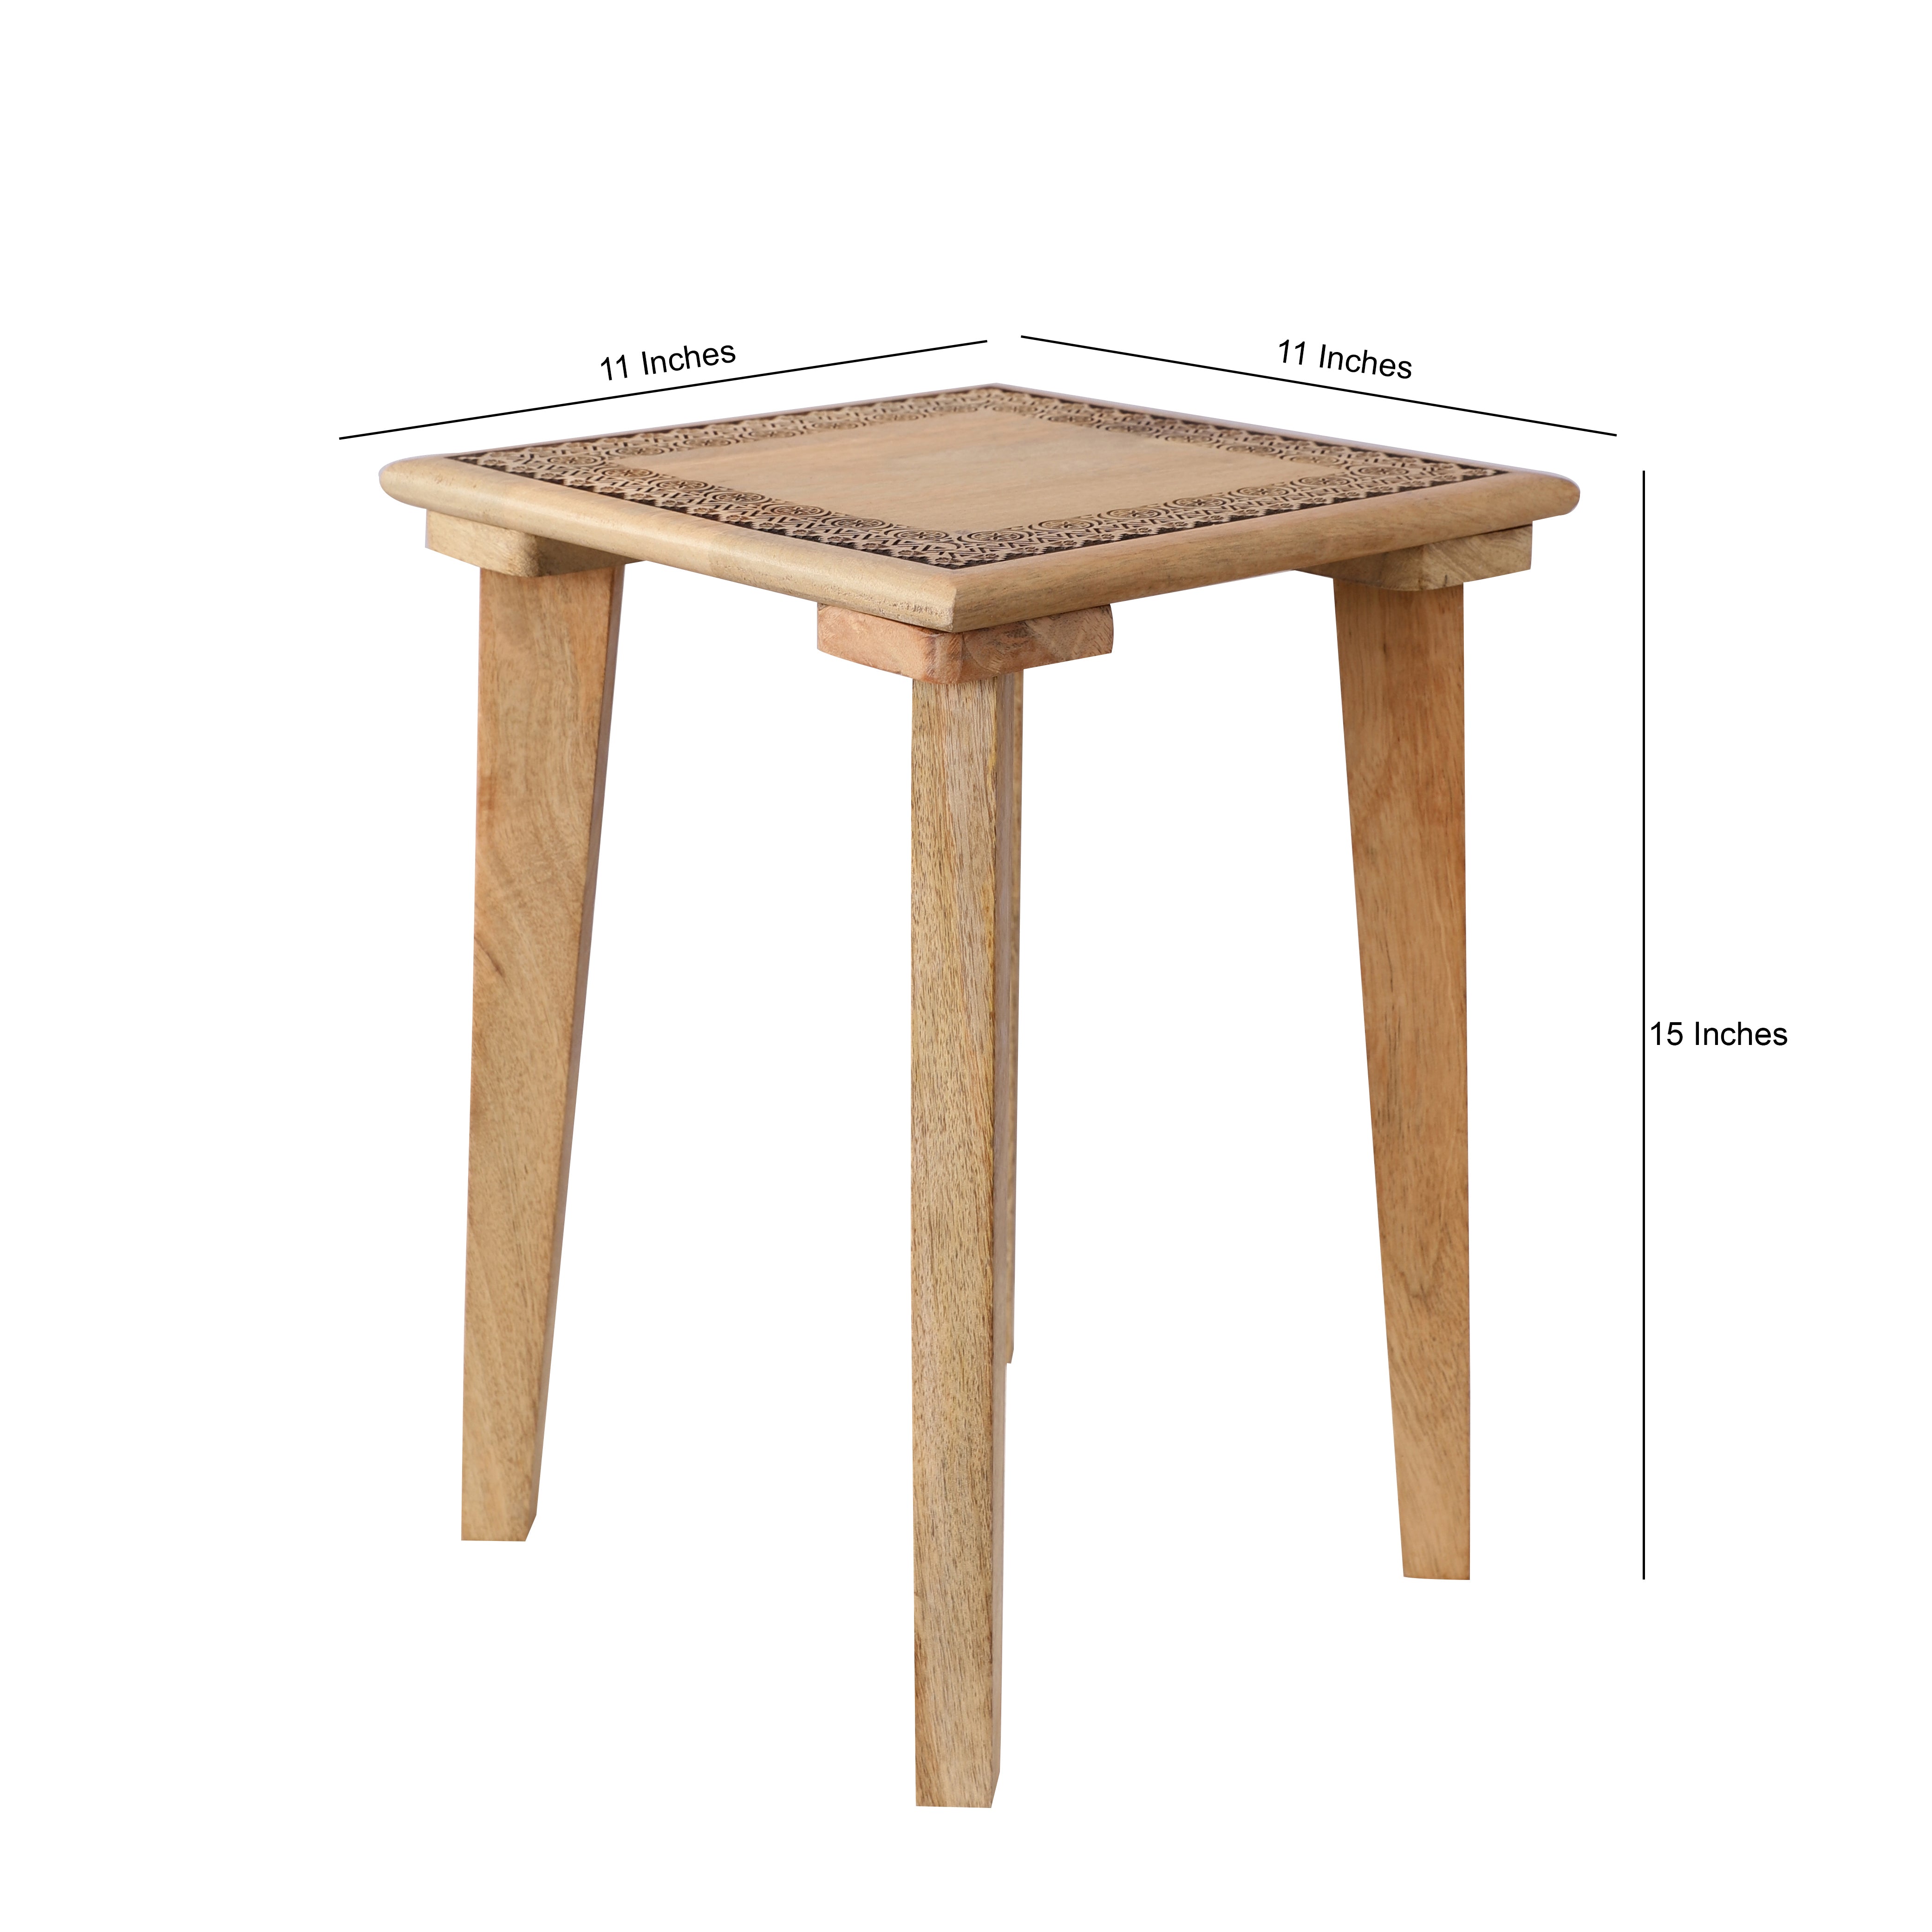 Square Wooden Table/Stool